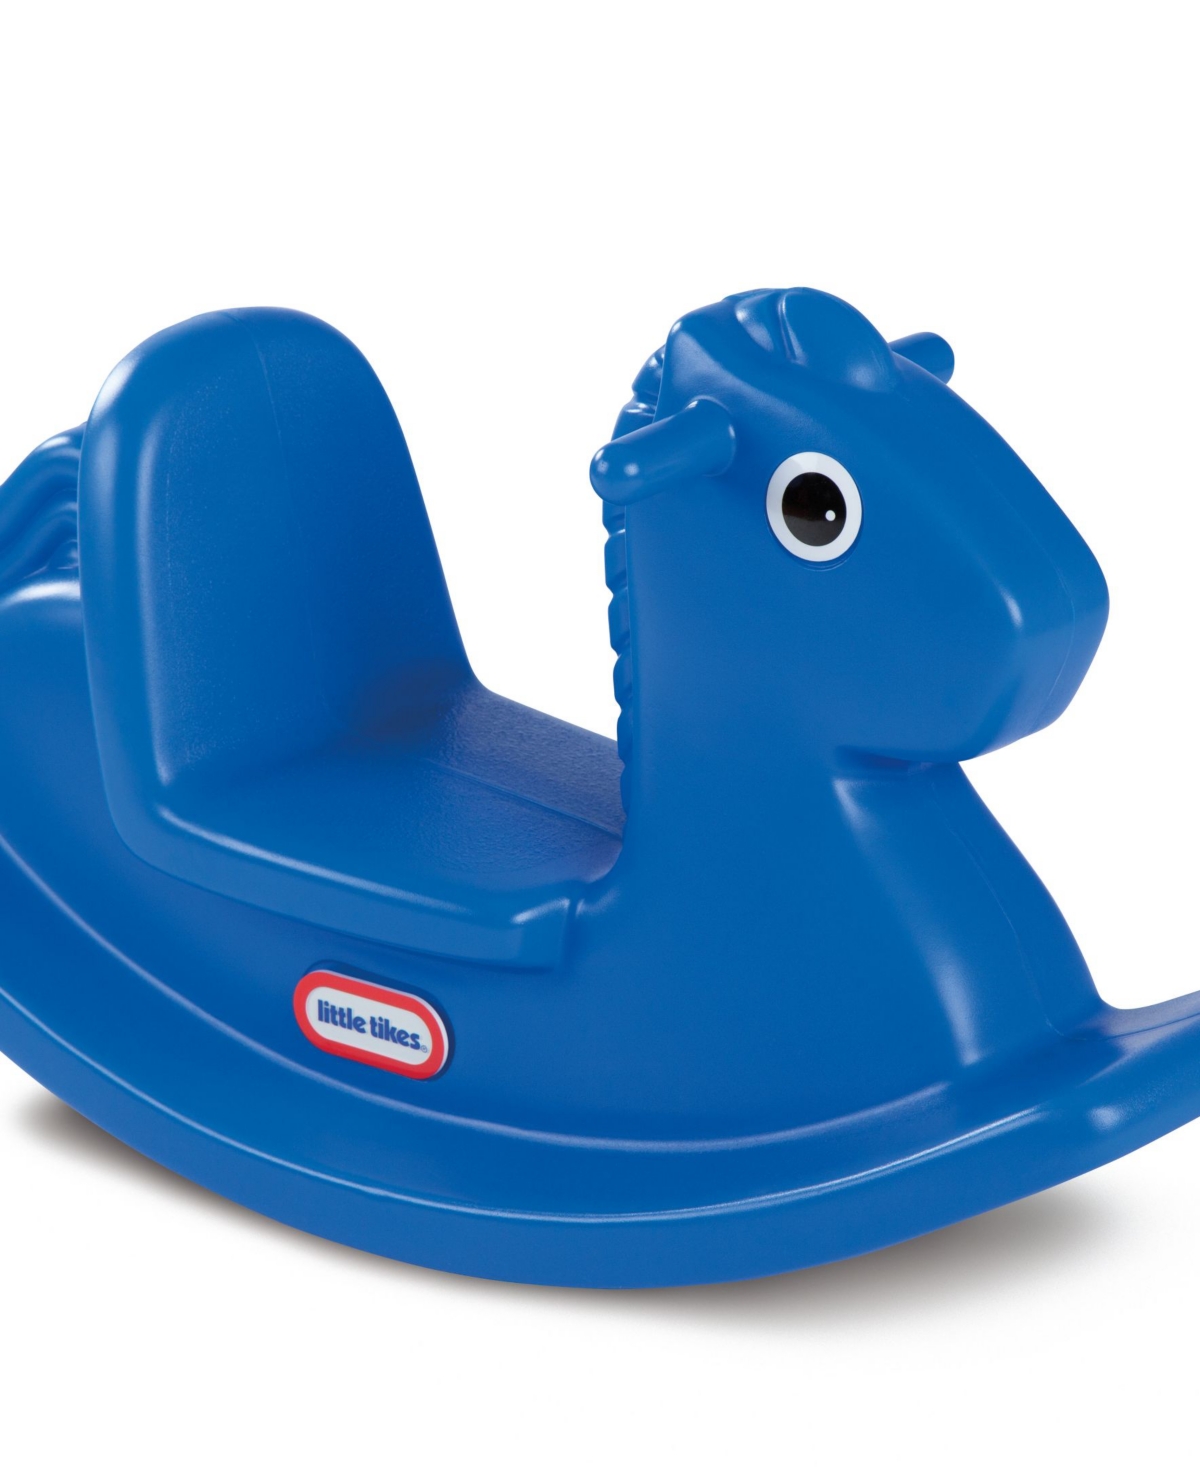 Little Tikes Rocking Horse in Blue  Classic Indoor Outdoor Toddler Ride-on Toy - For Kids Boys Girls Ages 12 Months to 3 Years old